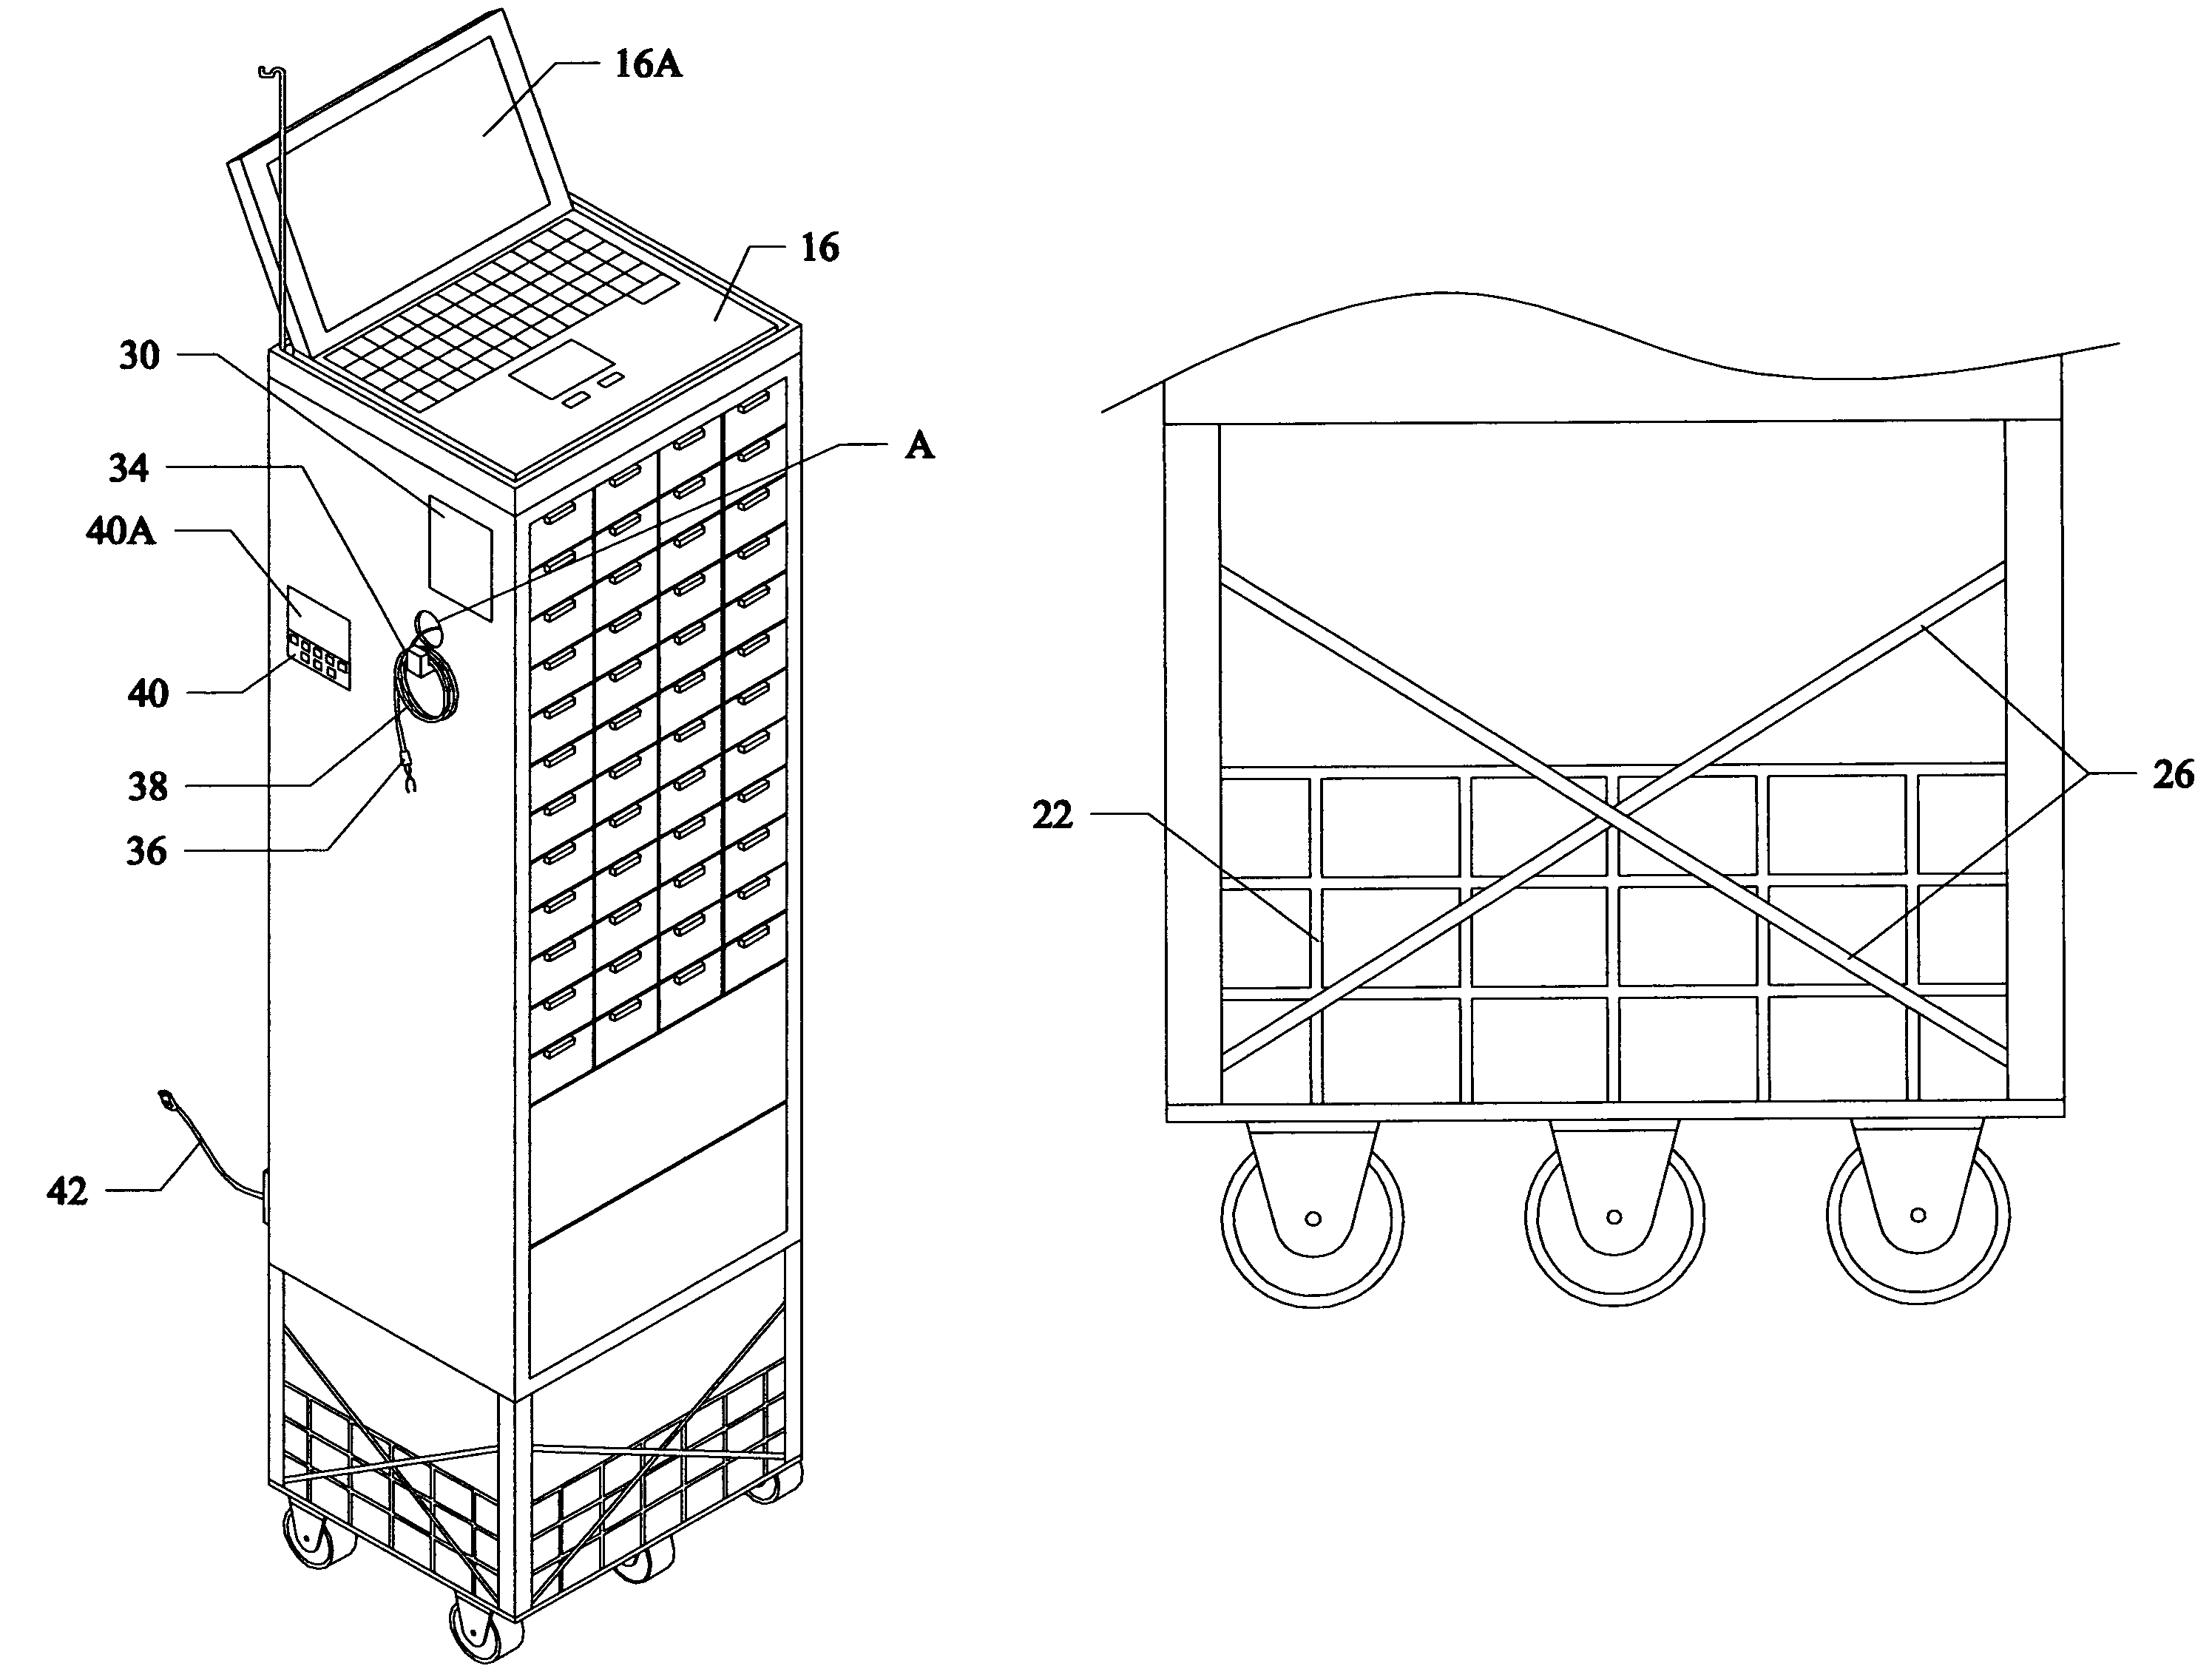 Automated system and device for management and dispensation of respiratory therapy medications